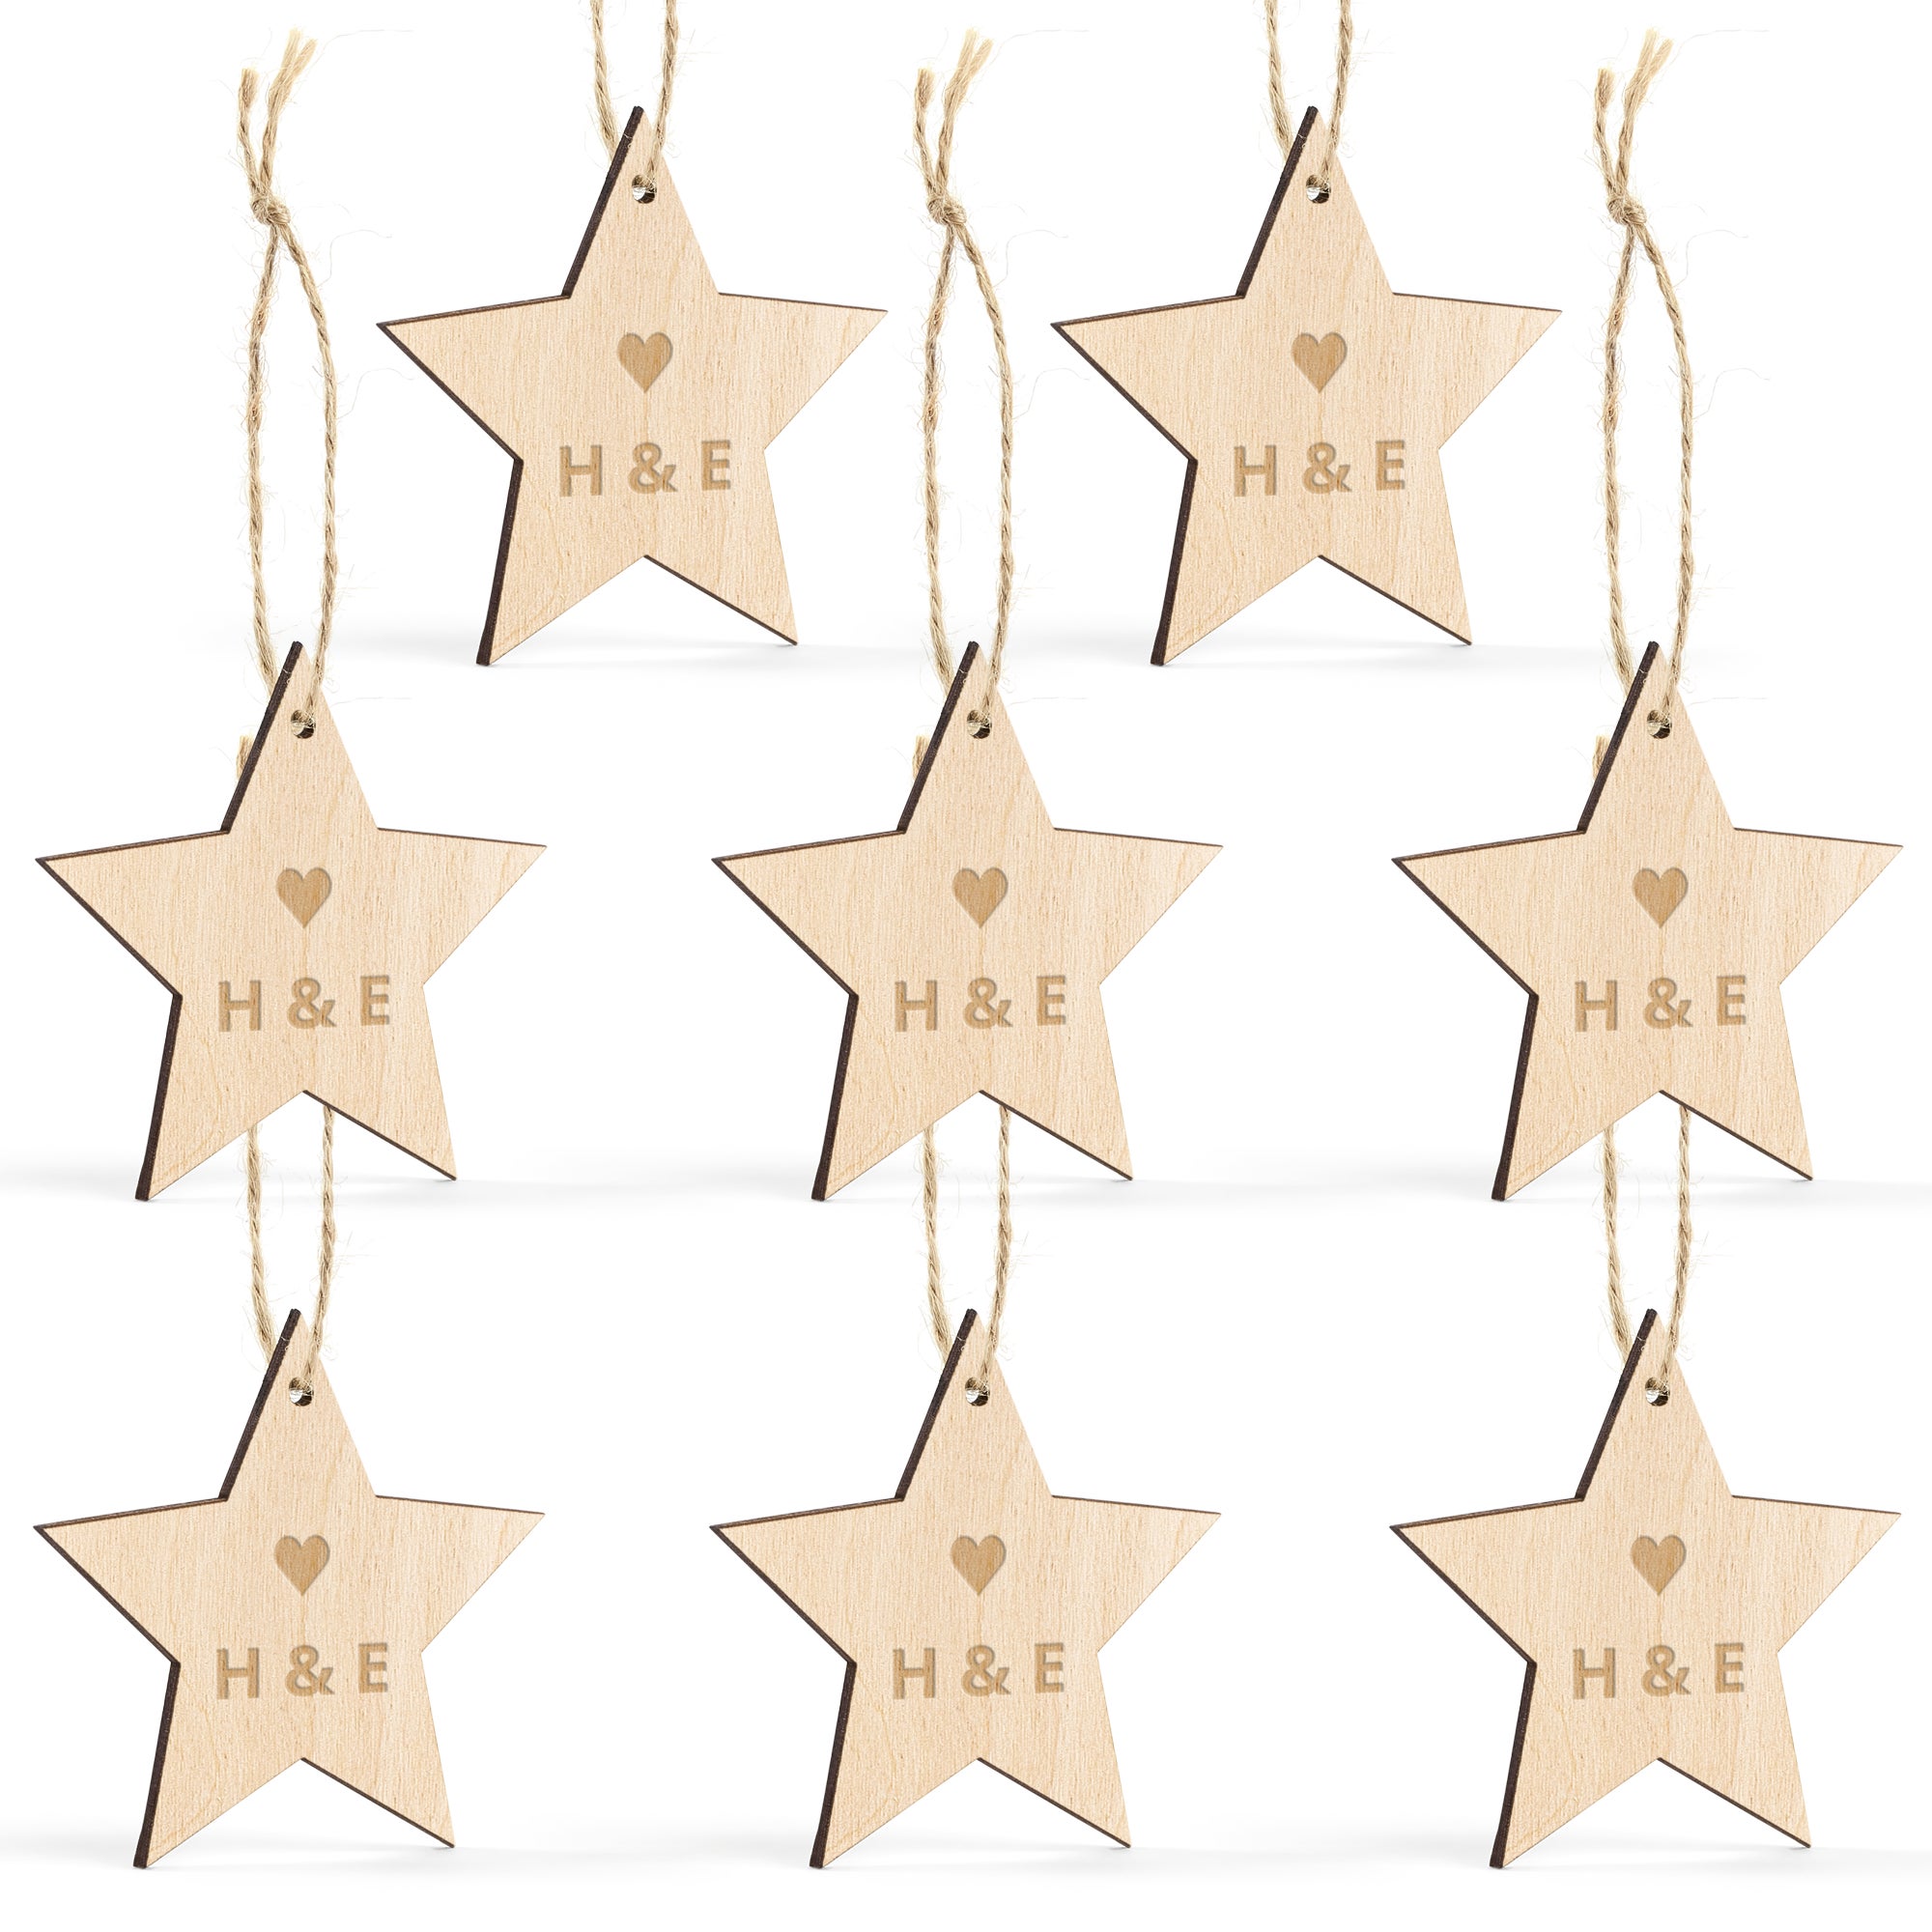 Personalised Christmas decorations - Wood - Engraved - Star - 8 pcs